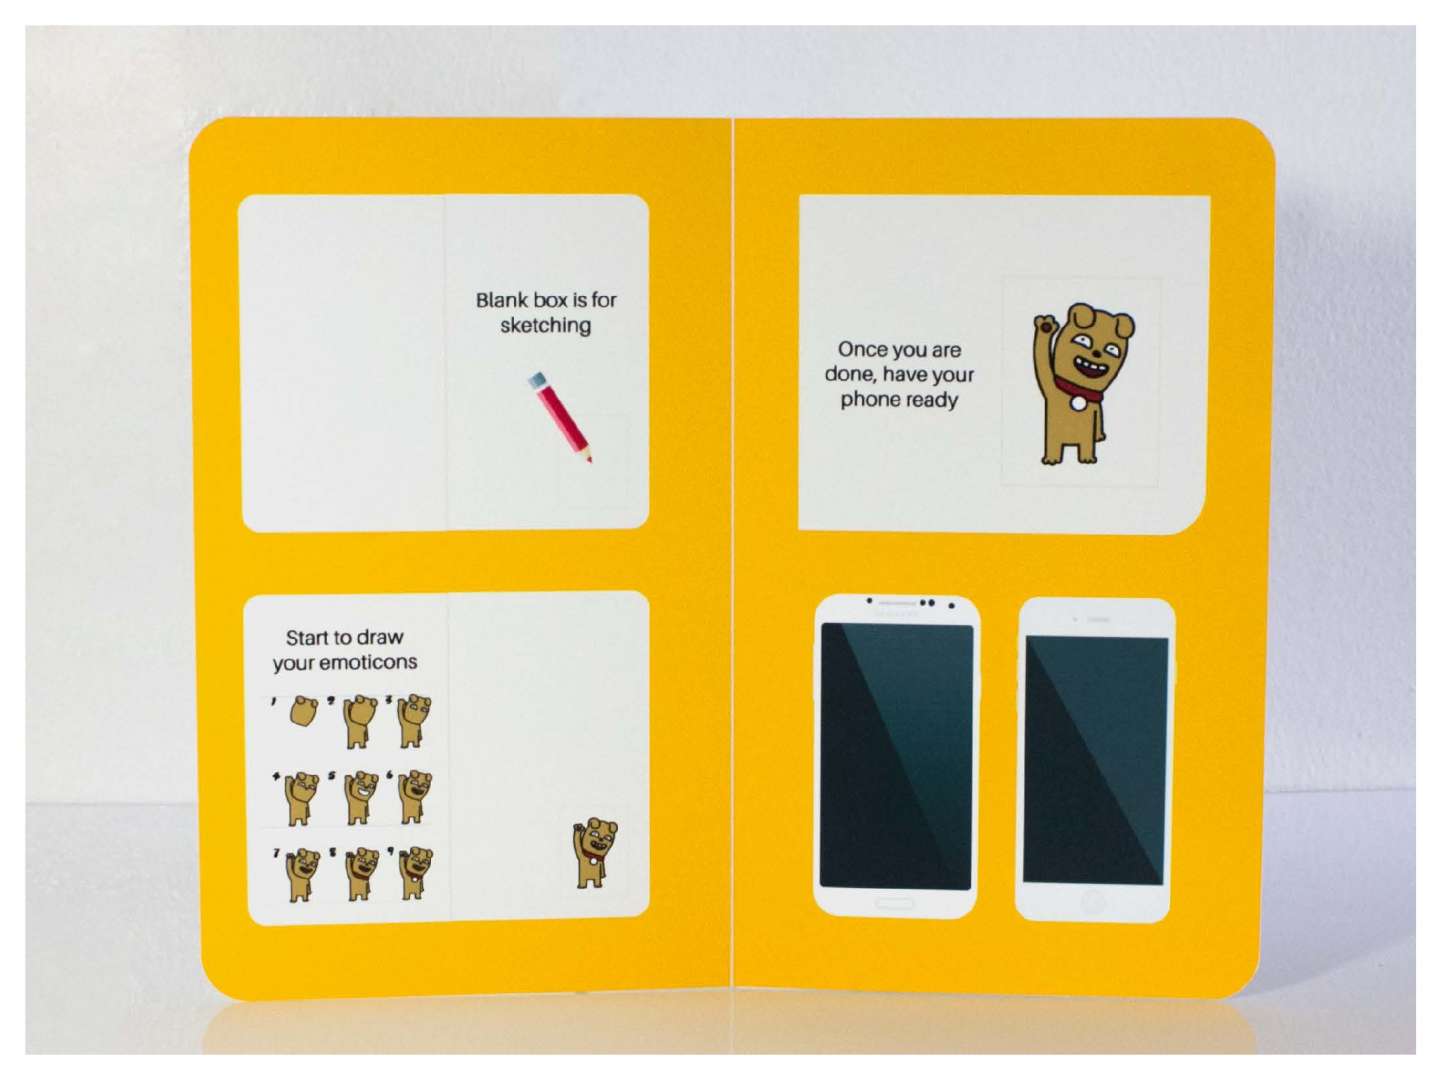 Moleskine Special Edition with Kakao Talk